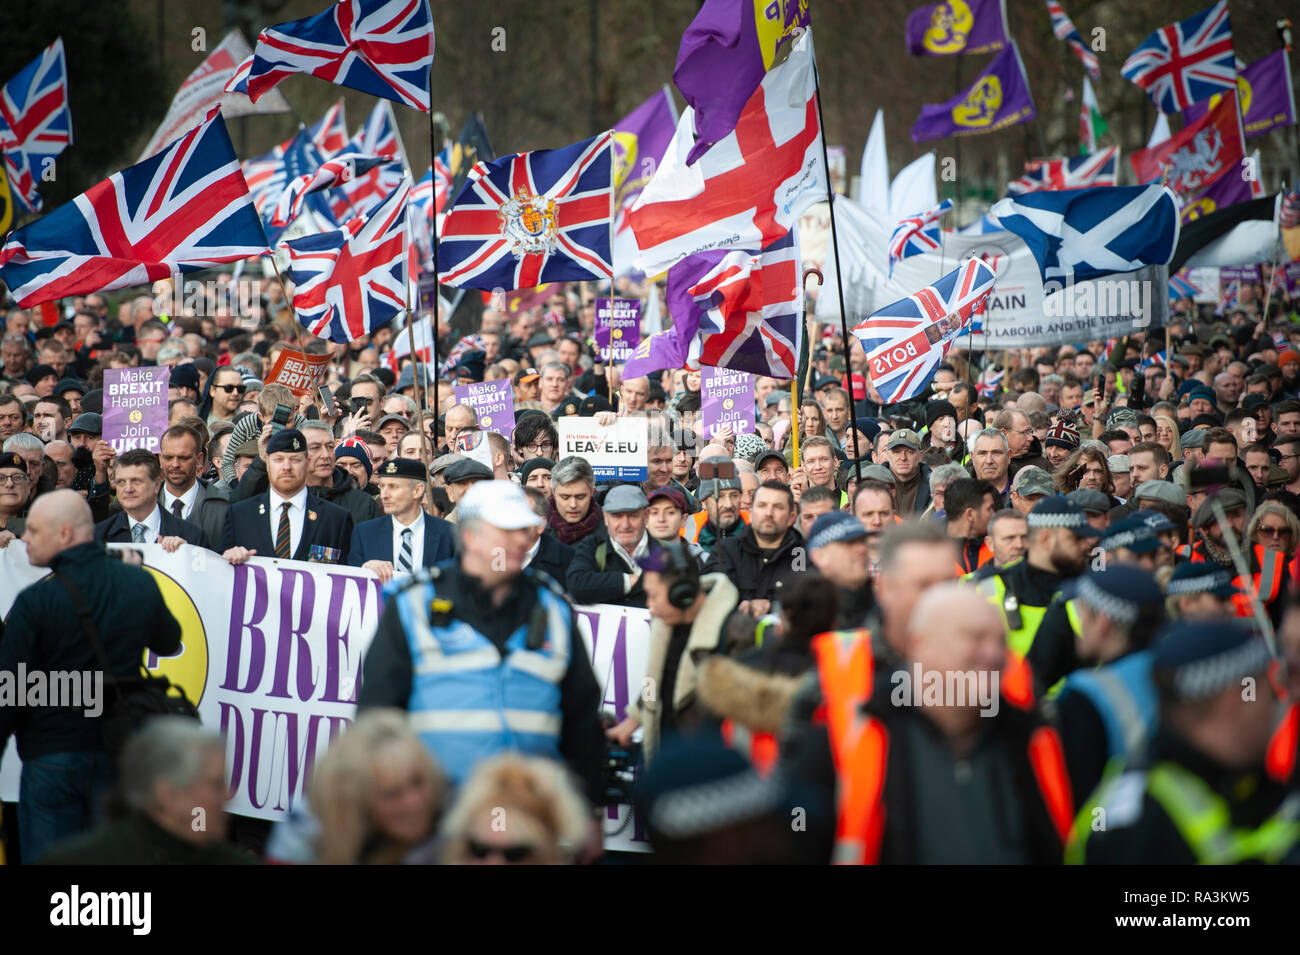 London, UK. 9th December 2018.  English Defence League founder Tommy Robinson heads a 'Brexit Betrayal' march, organised by UKIP. A counter-protest ag Stock Photo